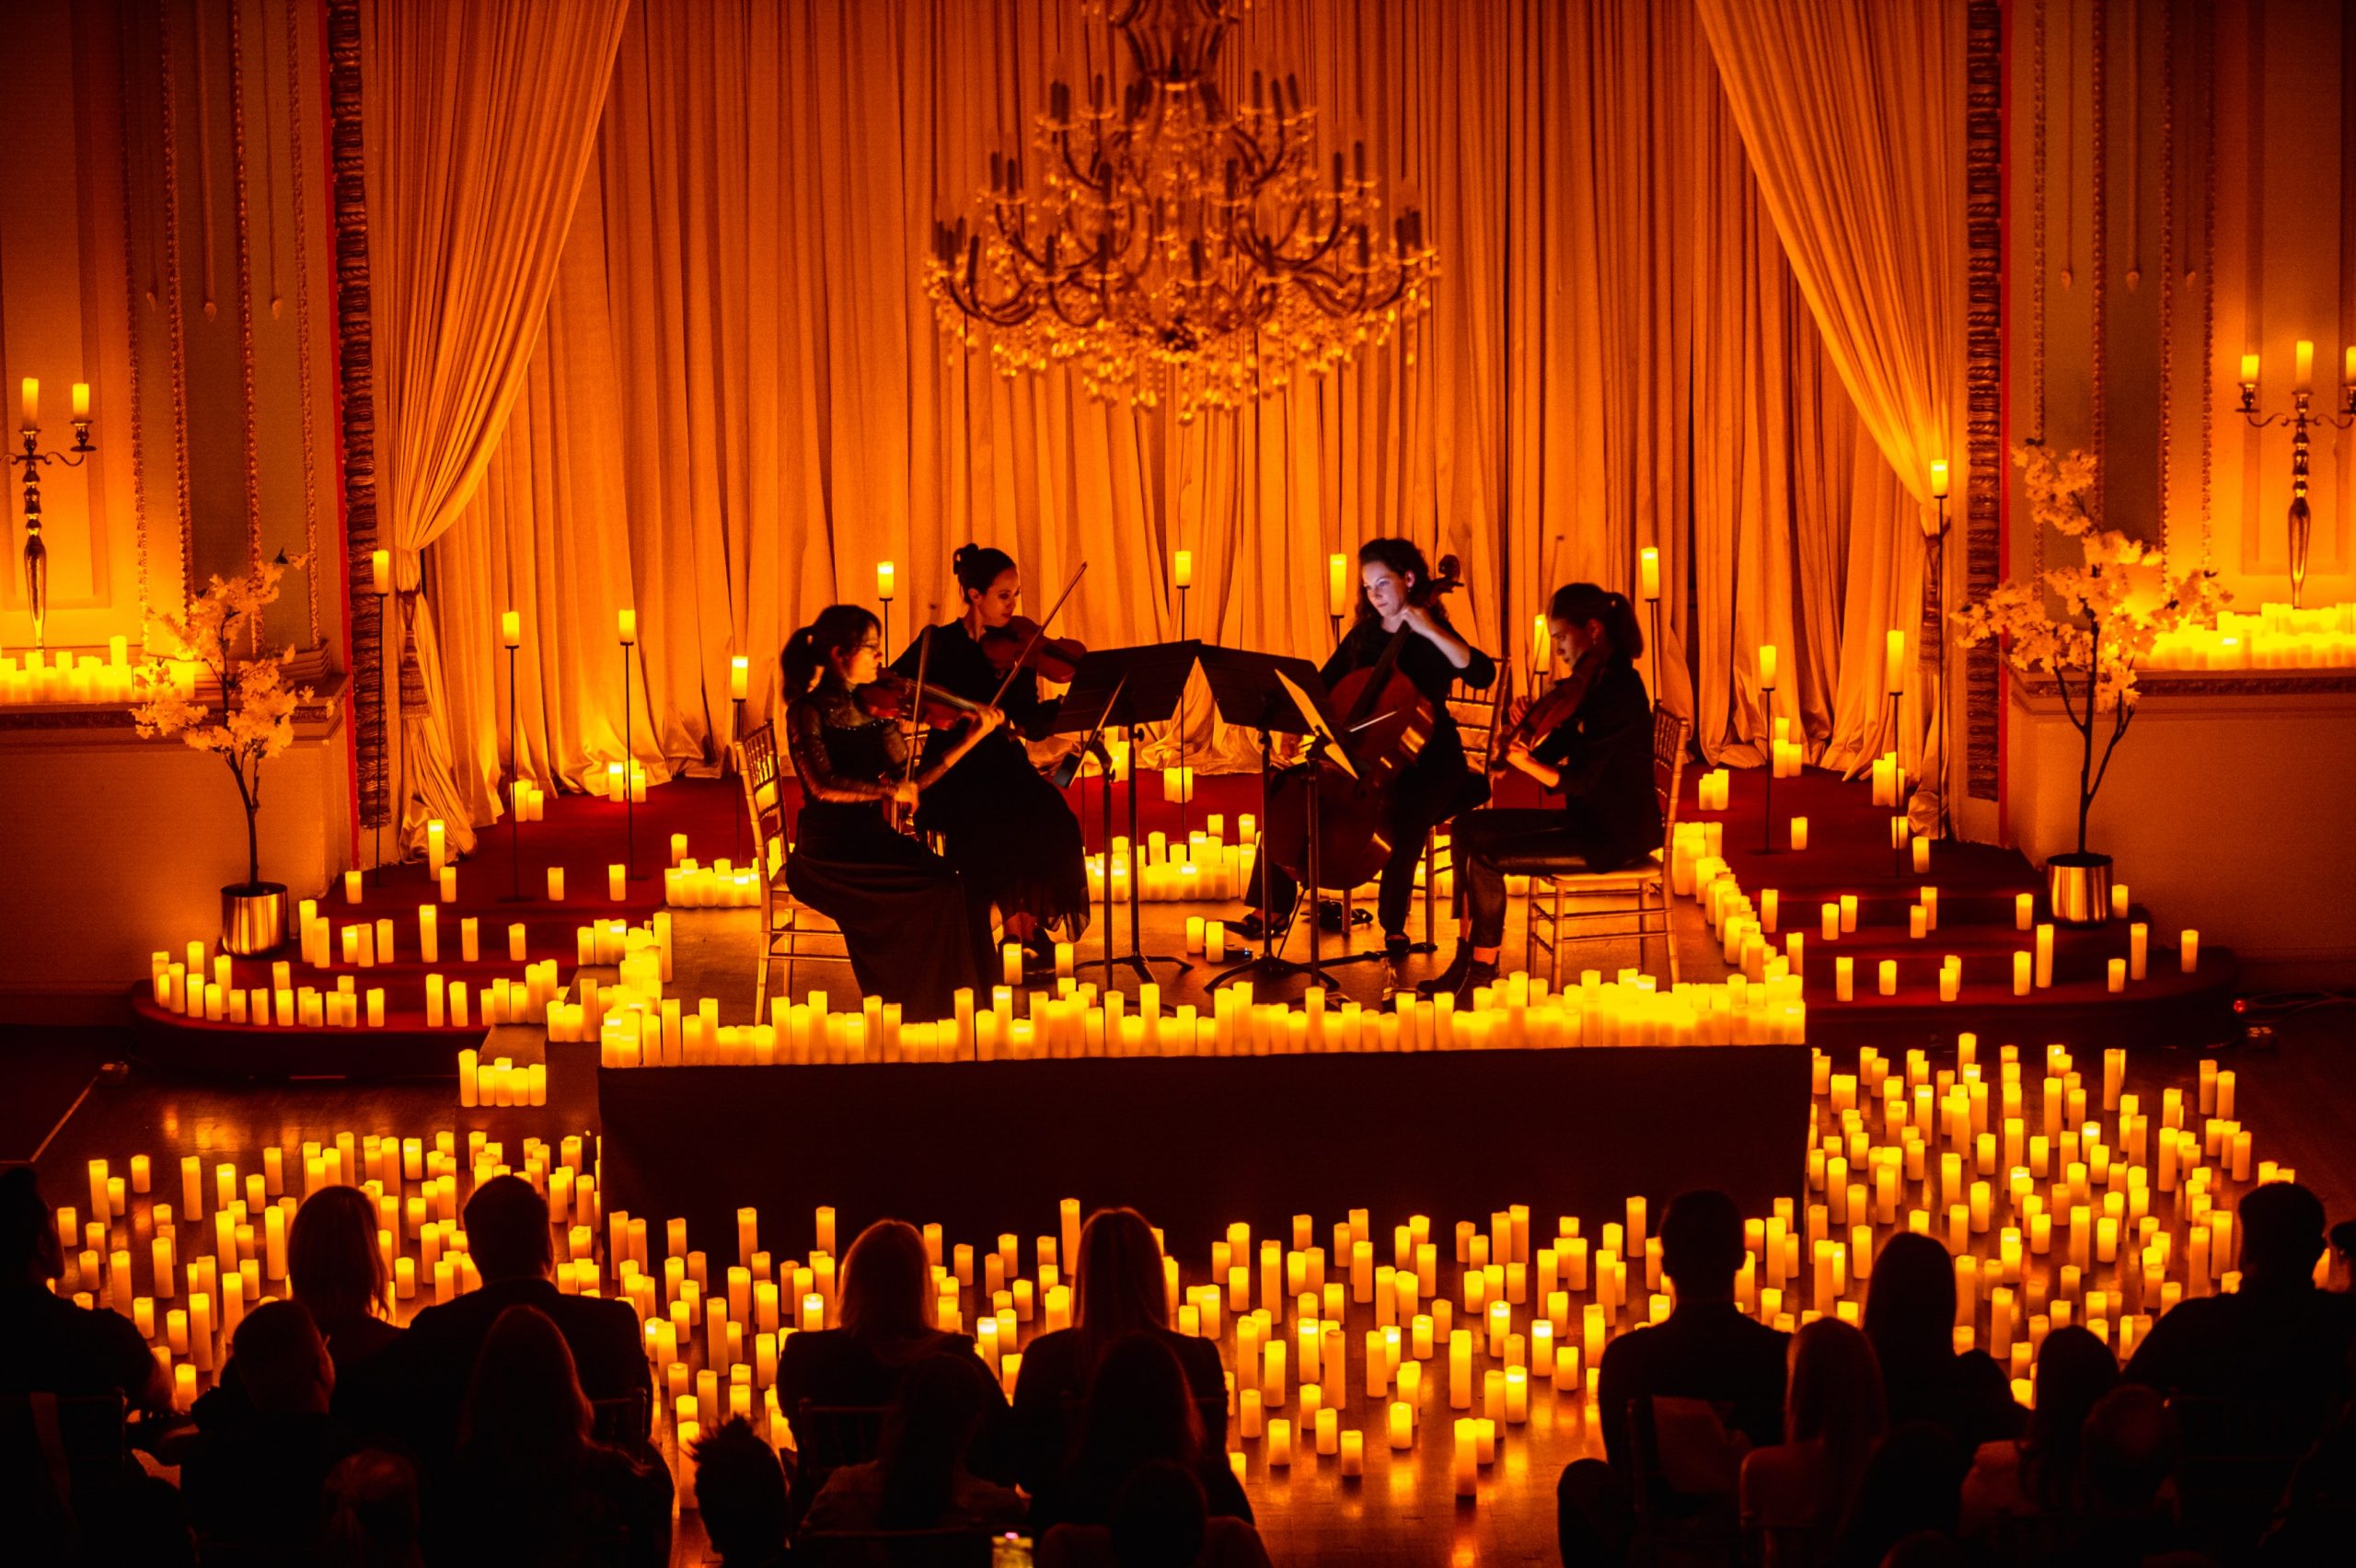 Candlelight Concerts In Albany Are Mesmerizing Events